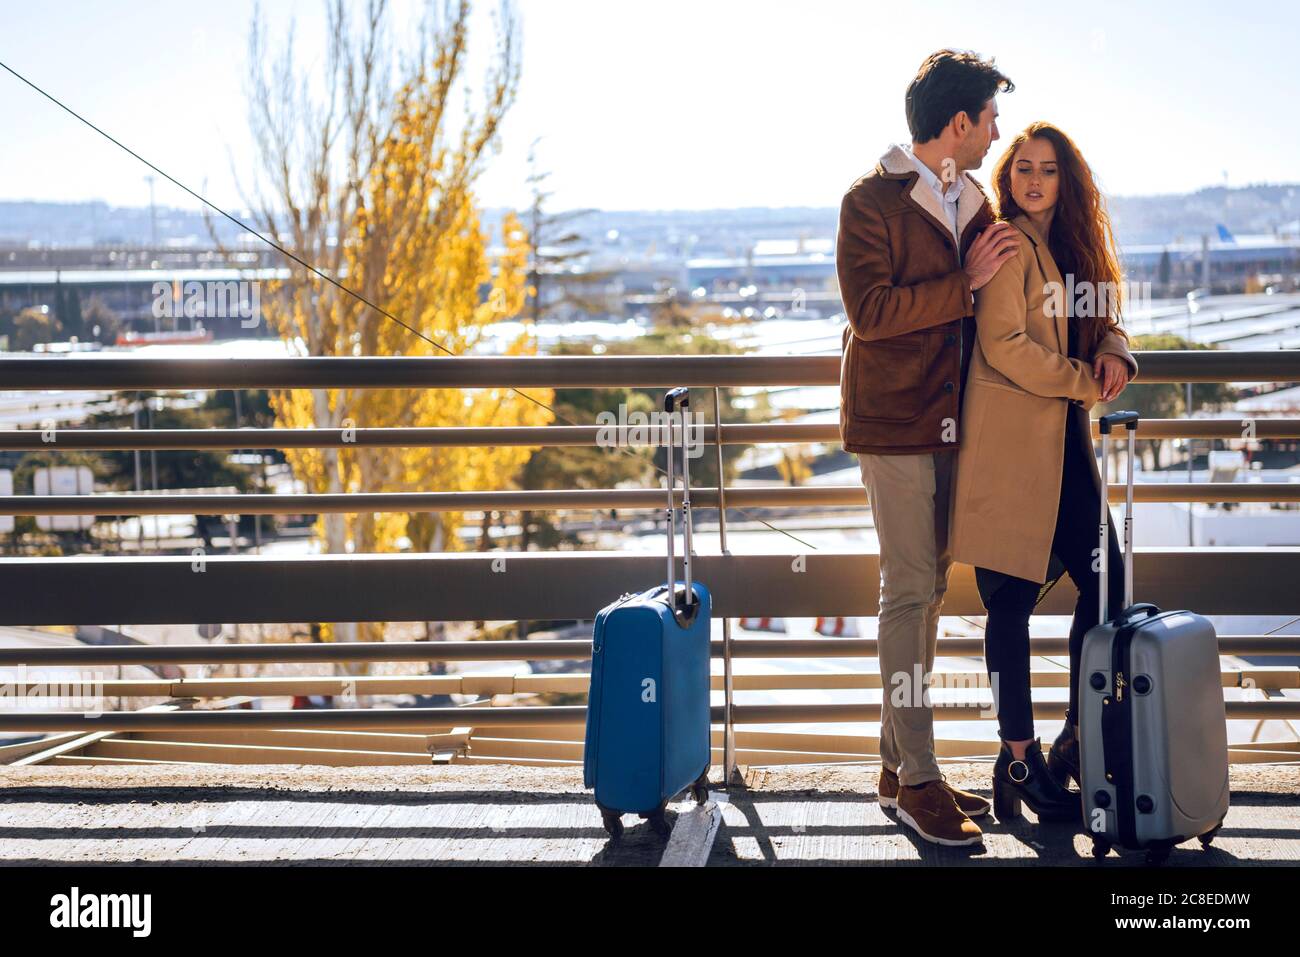 Romantic business couple standing on elevated walkway at airport Stock Photo